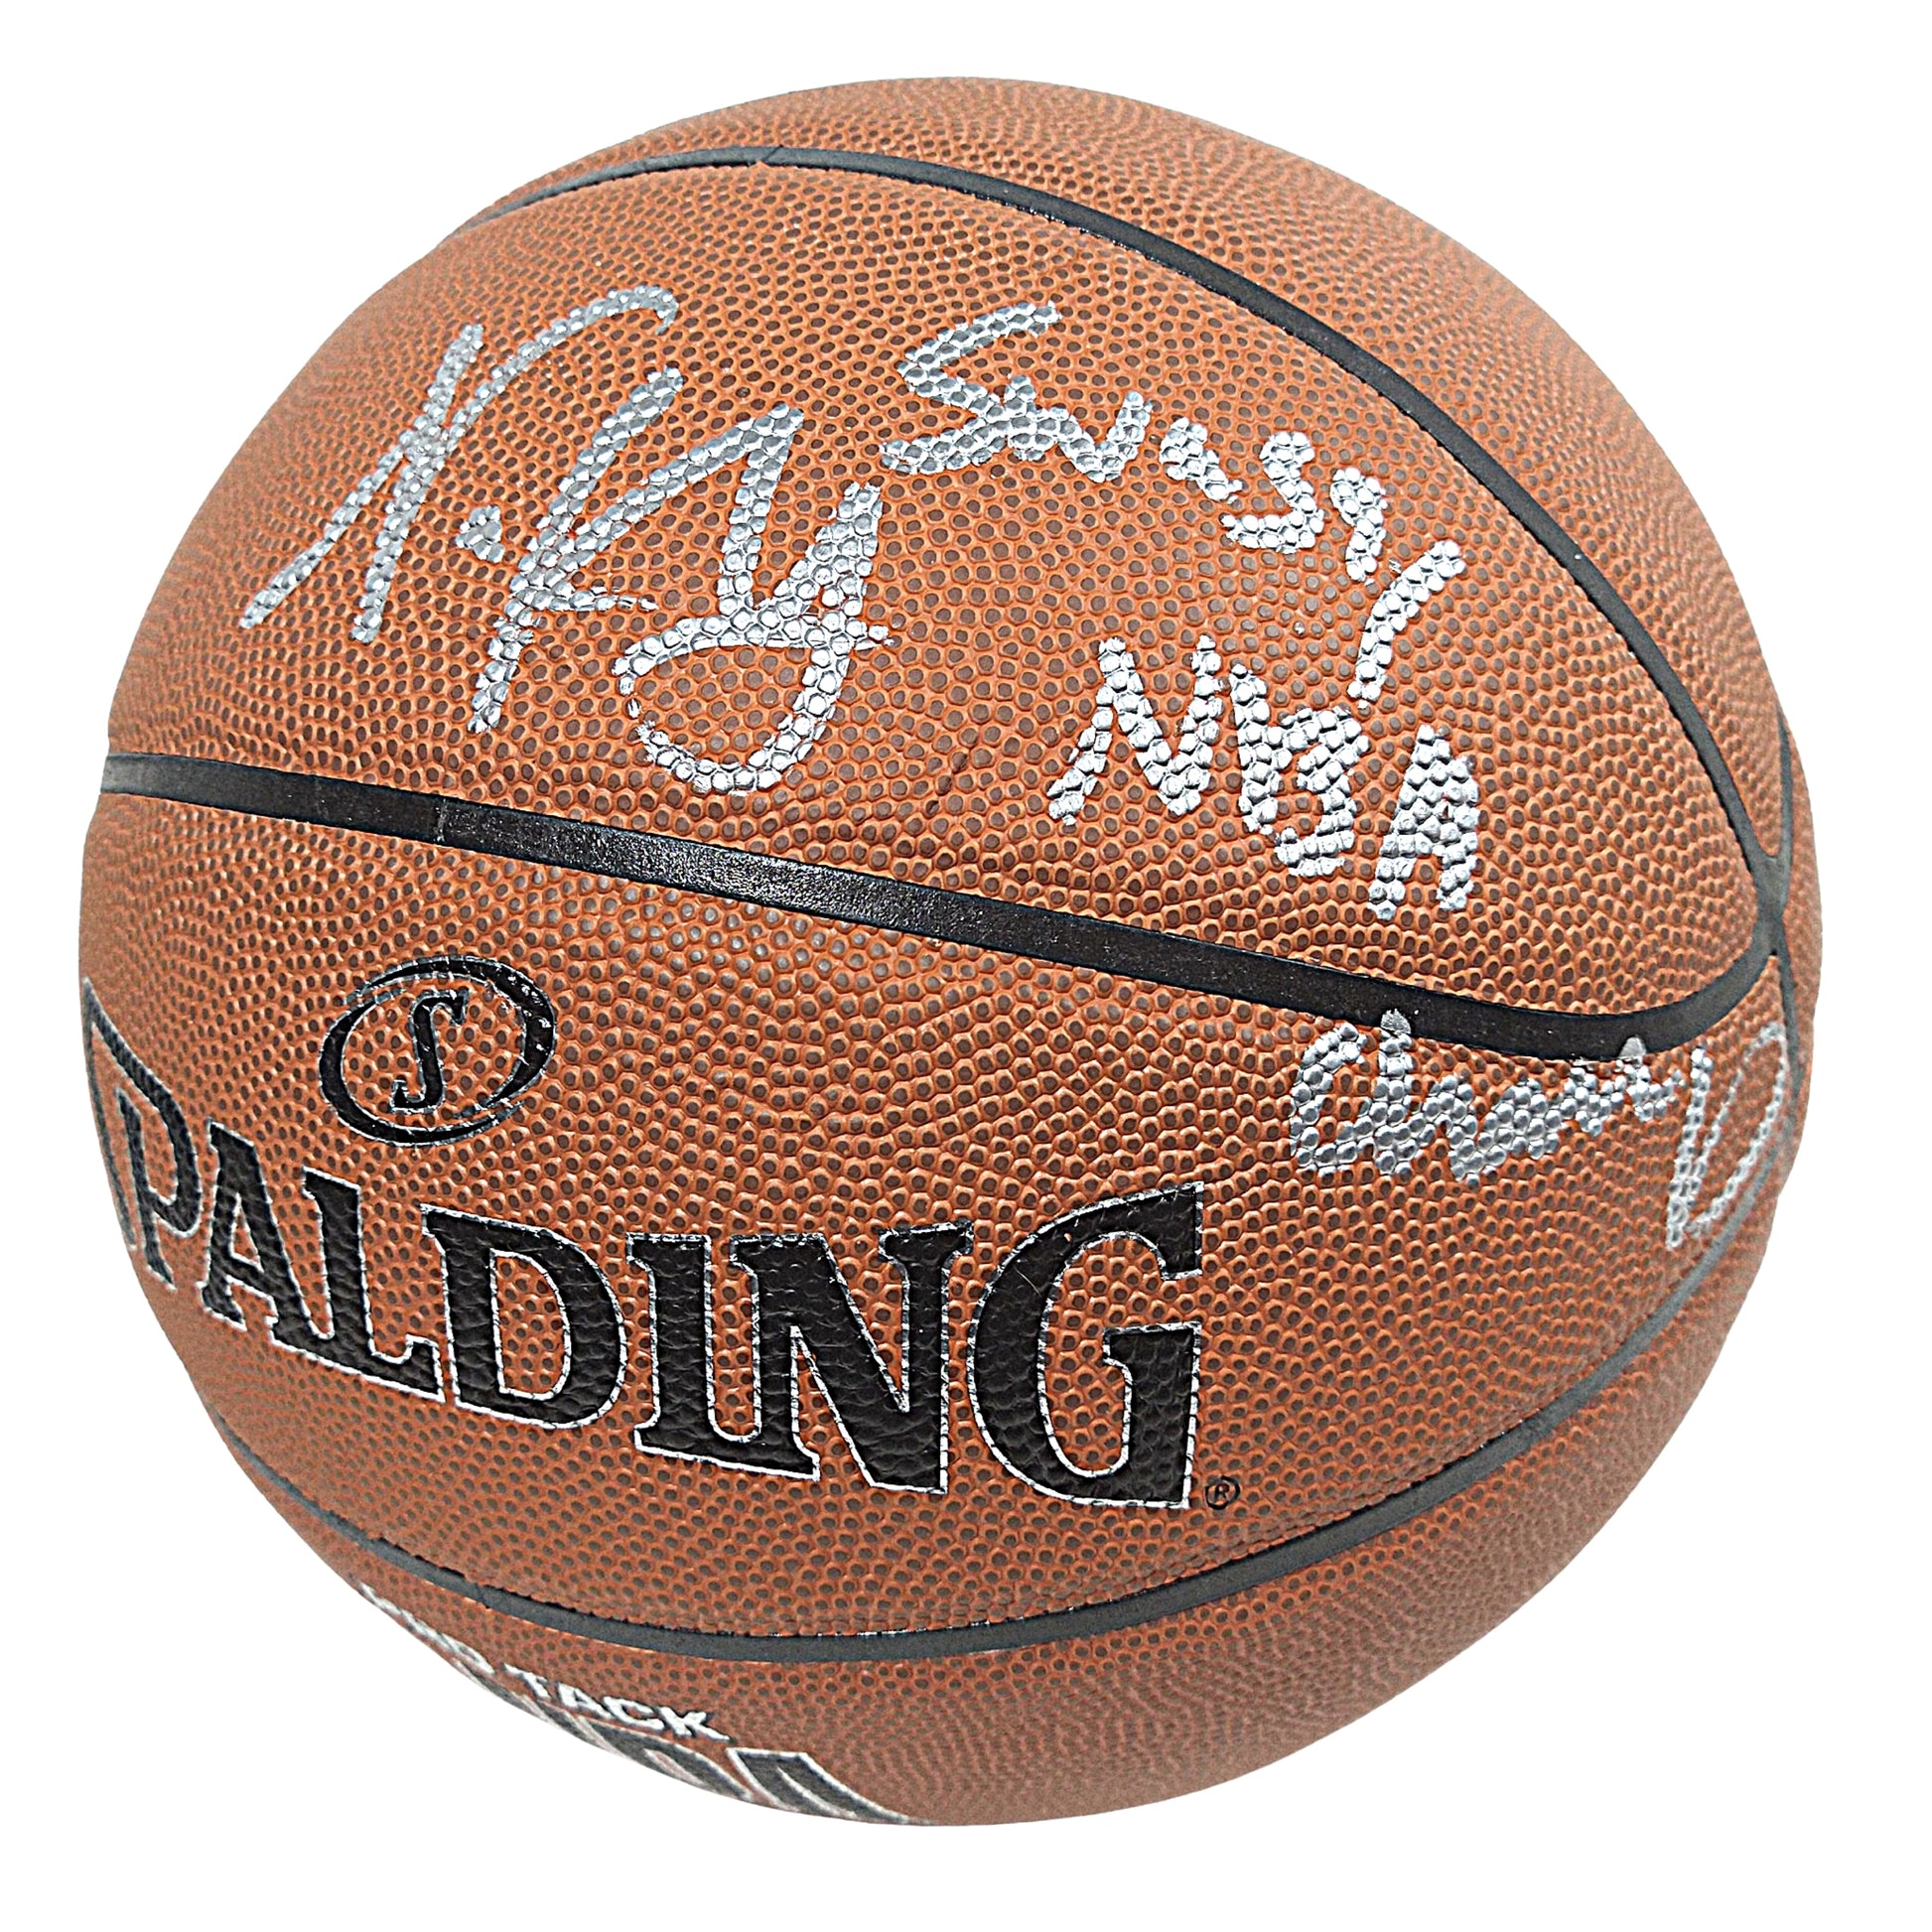 Basketballs- Autographed- Nick Young Signed NBA Basketball with NBA Champs Inscription - Golden State Warriors - USC Trojans - Exact Proof - Beckett BAS Authentication 102